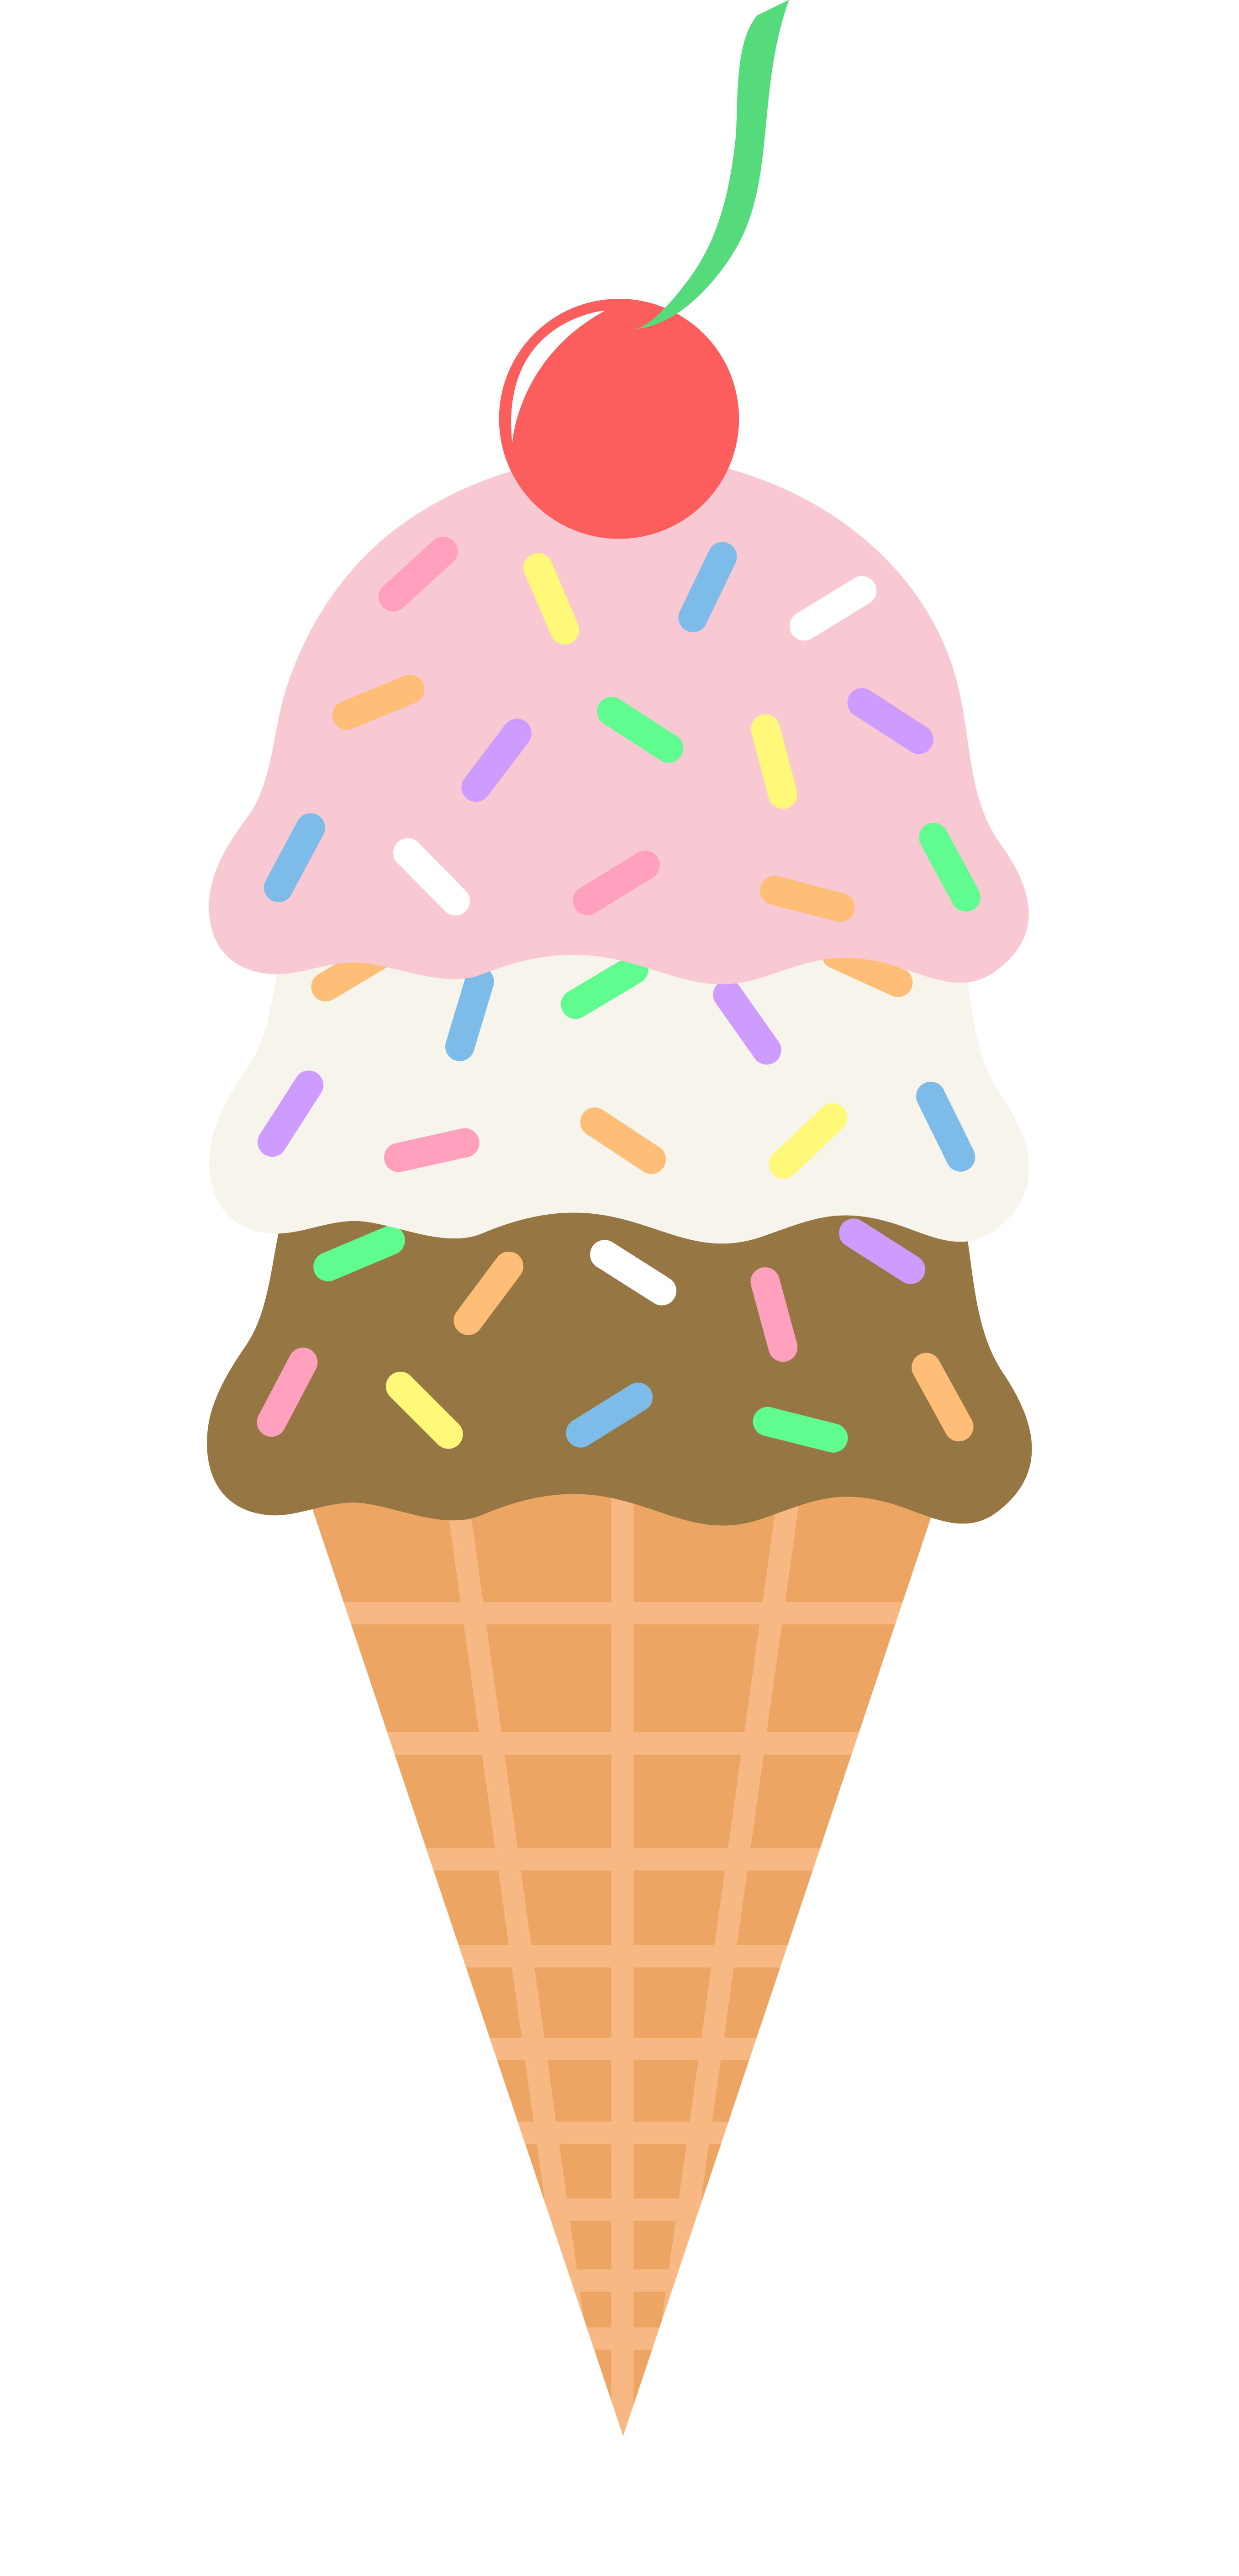 Ice Cream Scoop PNG Image, Three Scoope Ice Cream With Wipped, Cold, Scoope,  Icecream PNG Image For Free Download